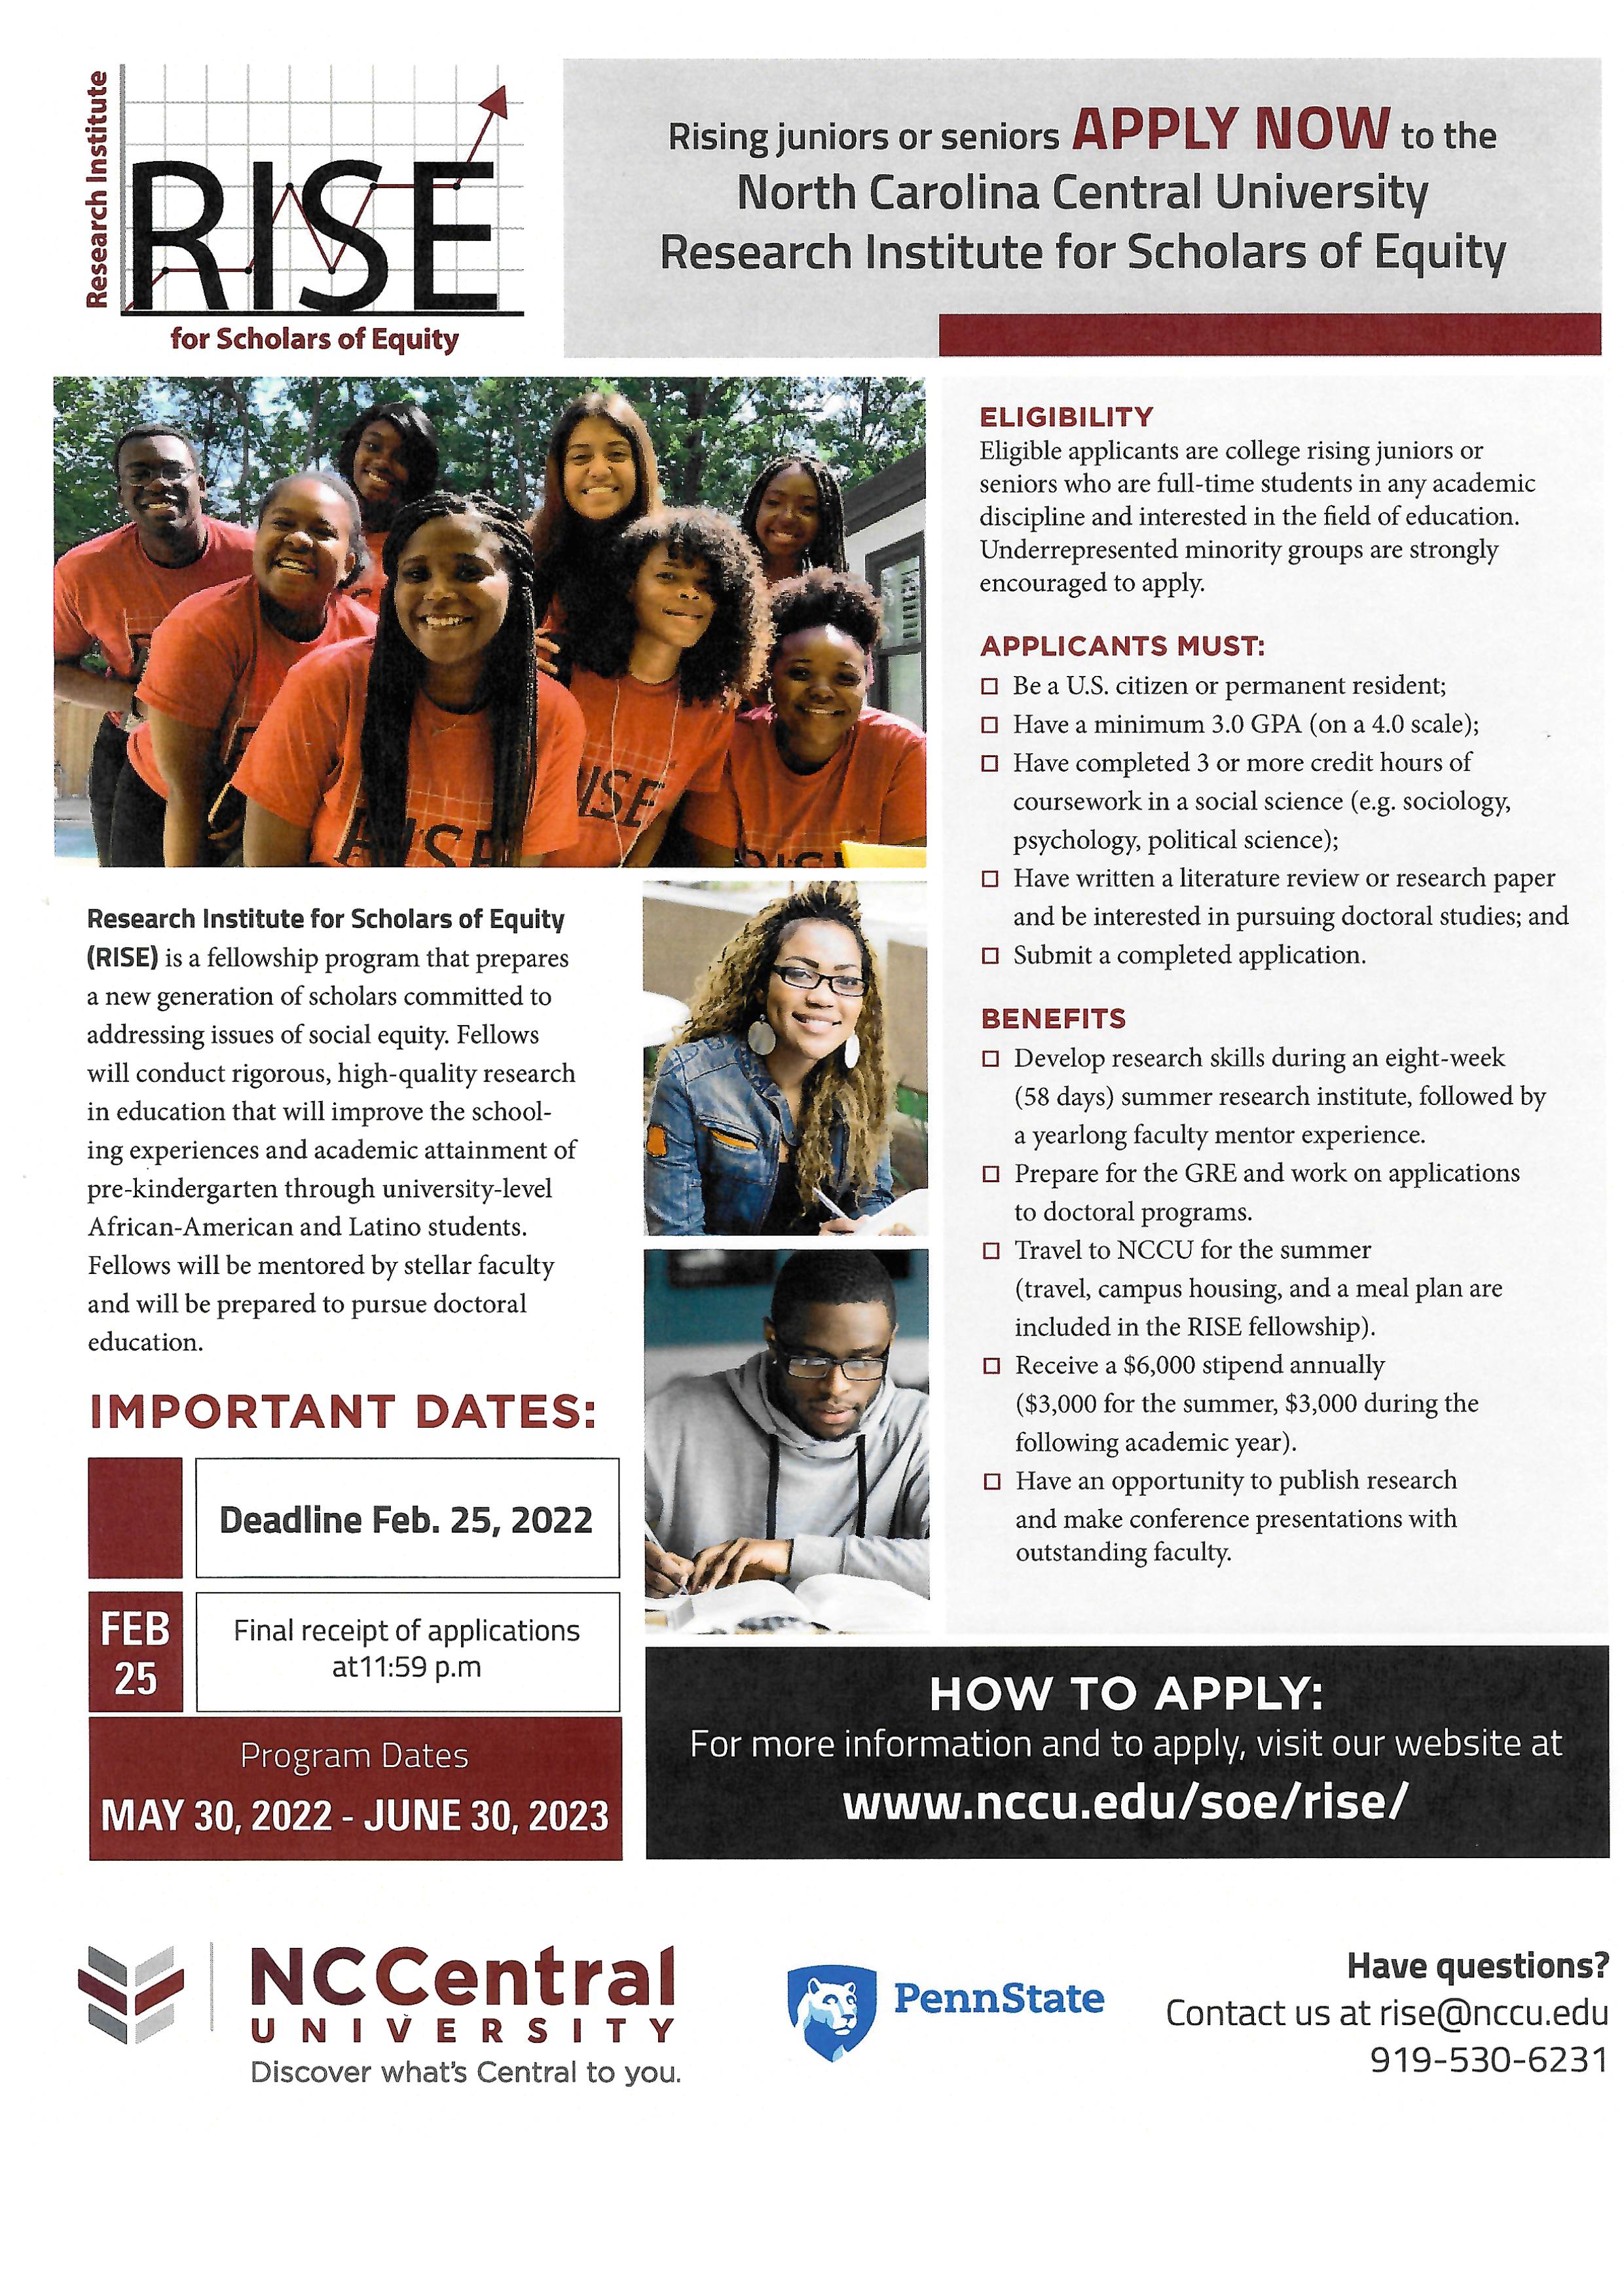 Research Institute for Scholars of Equity Fellowship (RISE): Call for Applications [article image]